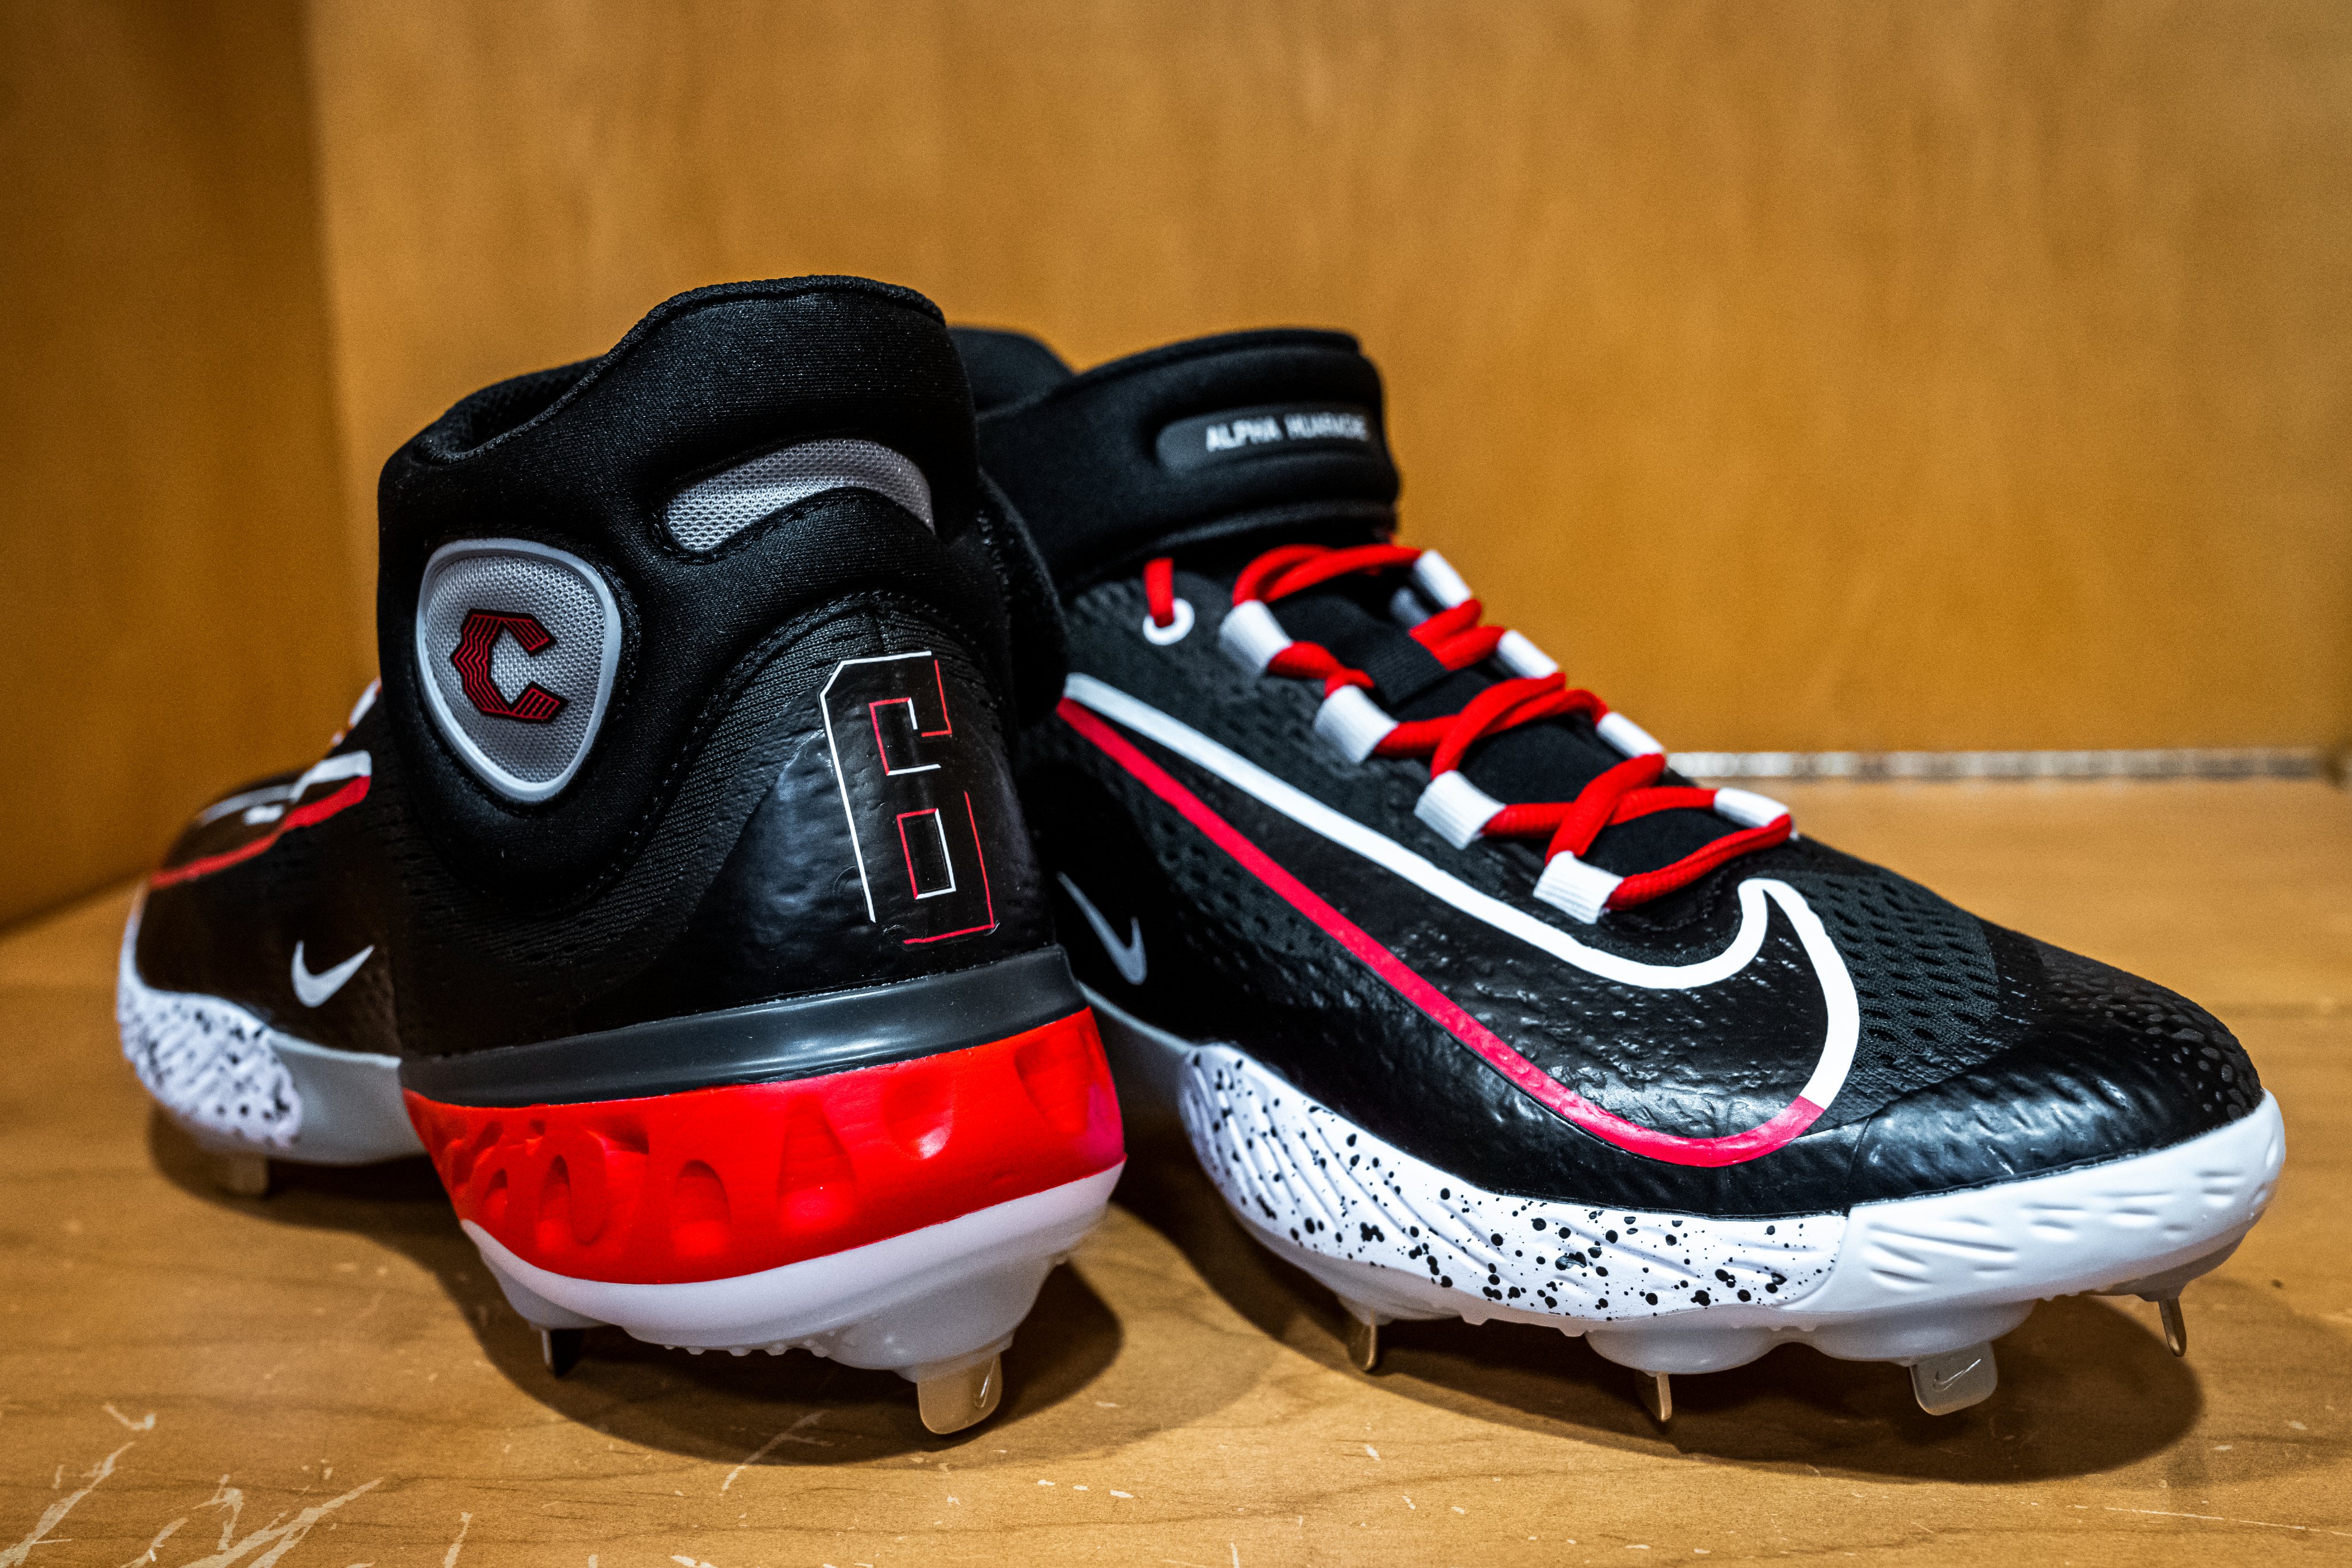 Cincinnati Reds on X: Indy's City Connect cleats